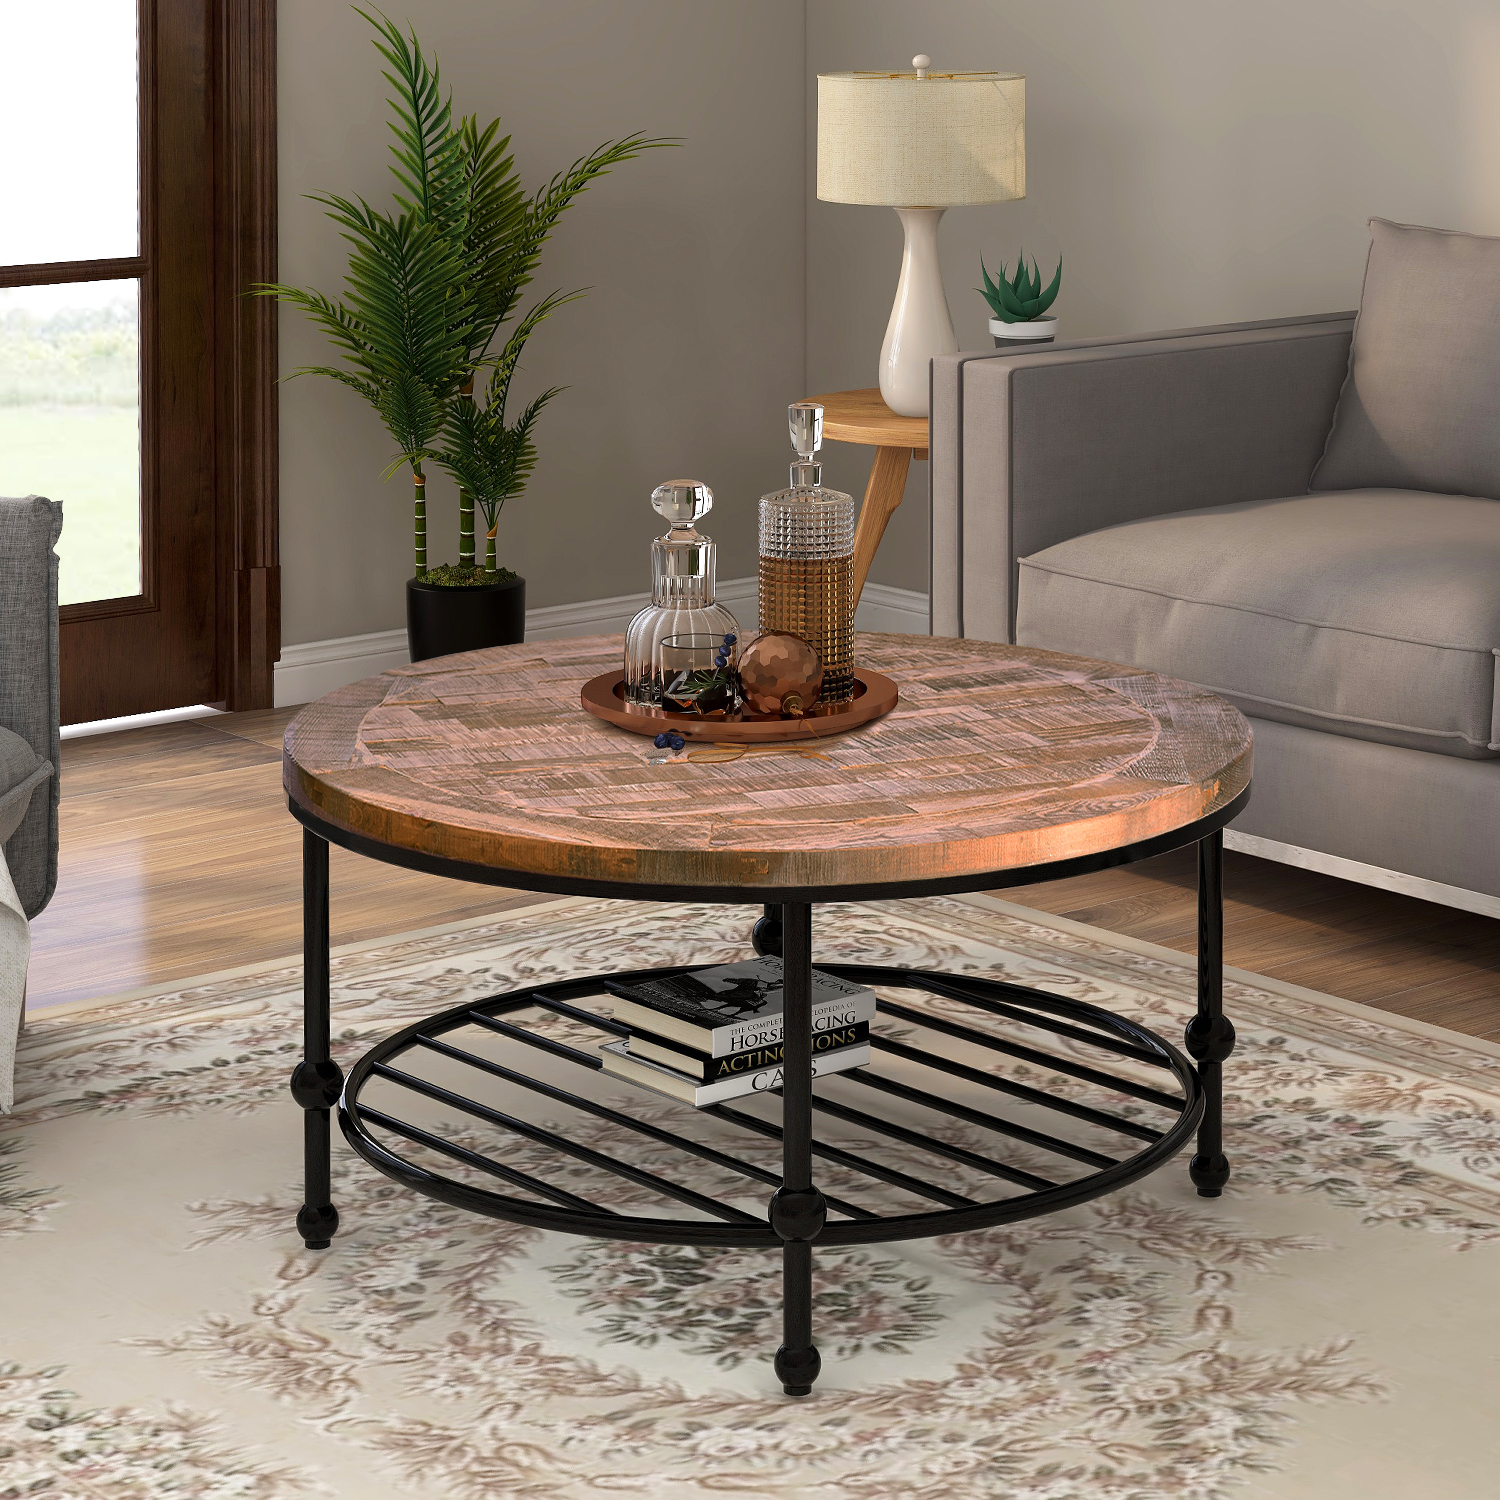 Round Rustic Natural Coffee Table With Storage Shelf